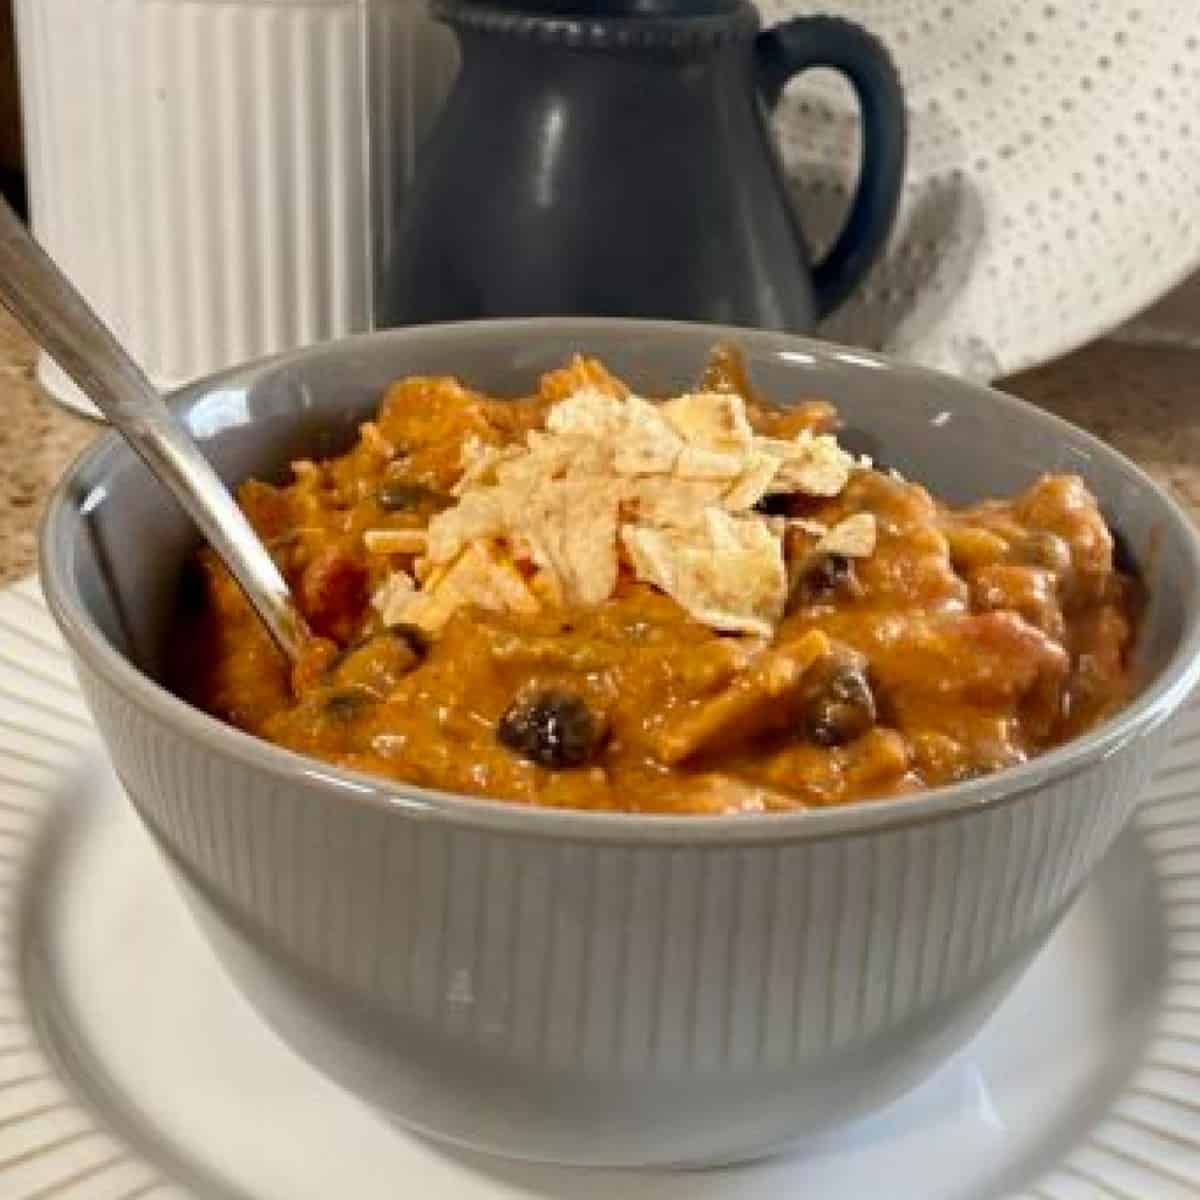 A heaping bowl of Zupa's chicken enchilada chili, brimming with tender chicken, flavorful enchilada sauce, and a medley of chili beans, vegetables, and spices. the chili is topped with cheese